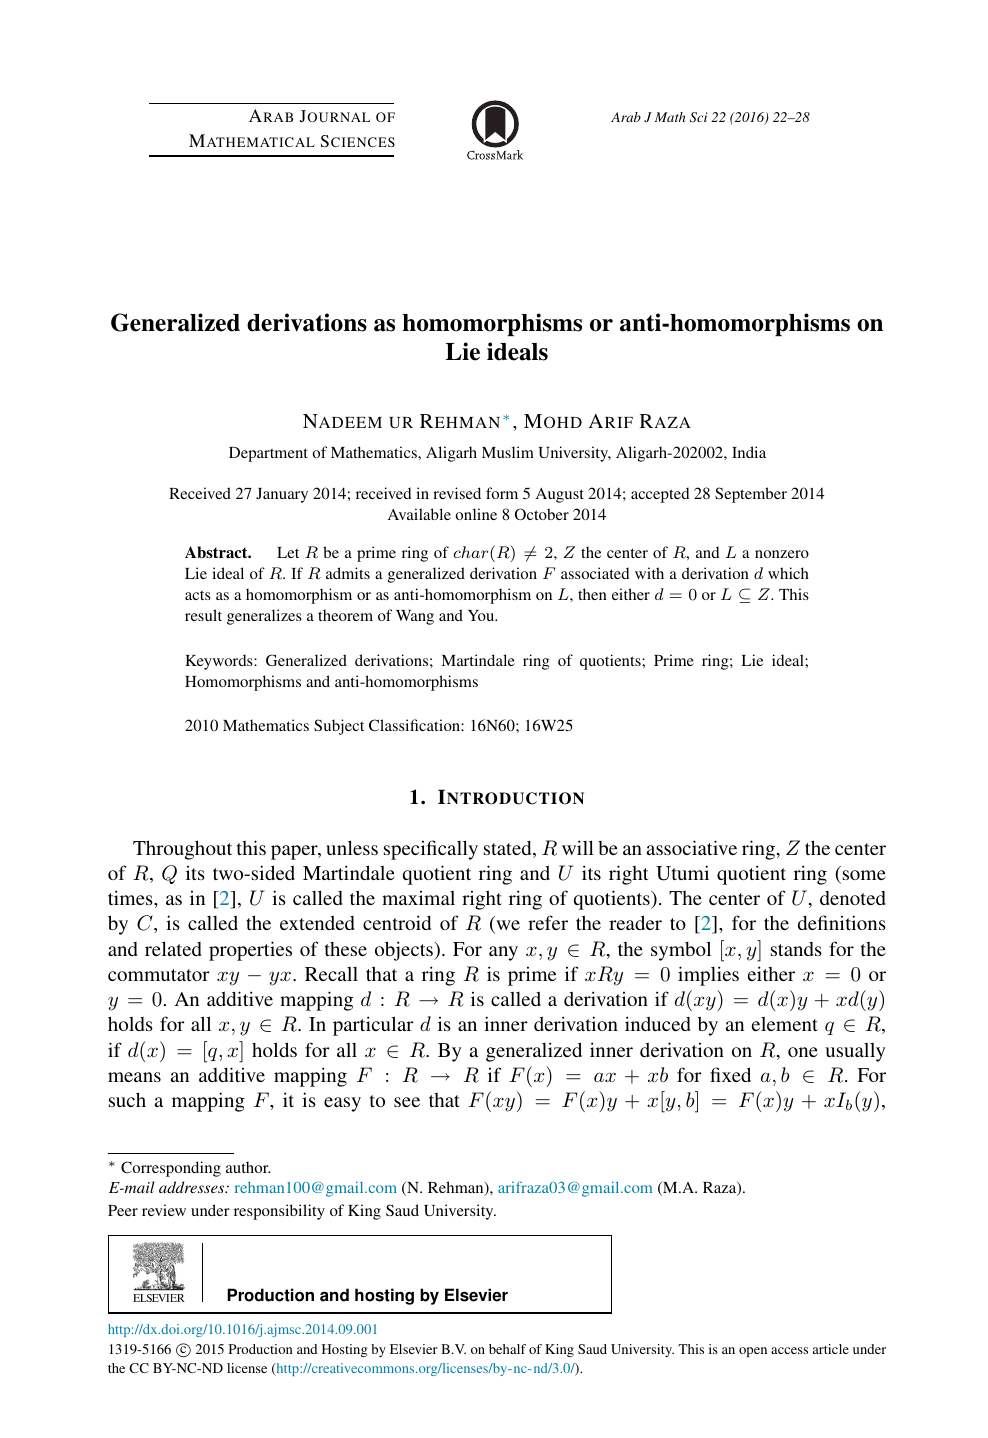 Generalized Derivations As Homomorphisms Or Anti Homomorphisms On Lie Ideals Topic Of Research Paper In Mathematics Download Scholarly Article Pdf And Read For Free On Cyberleninka Open Science Hub